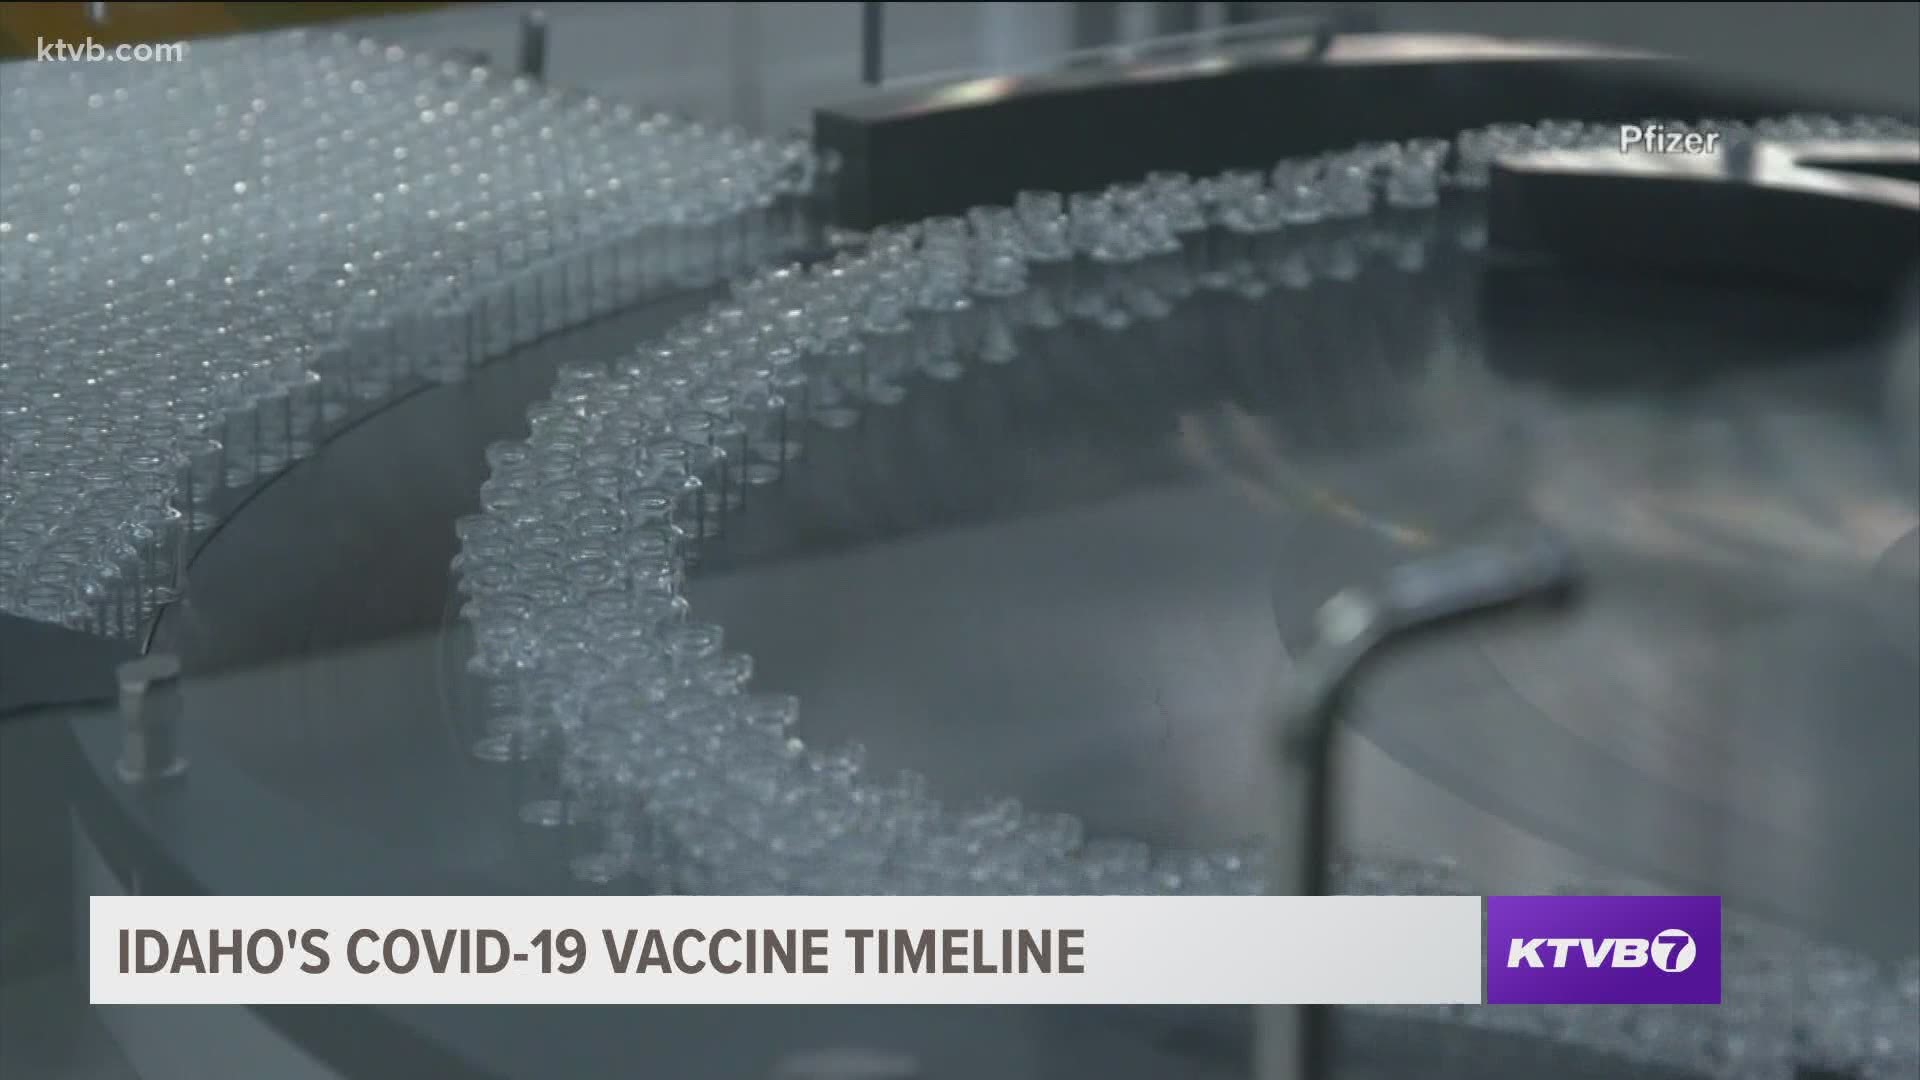 Based on the tentative timeline, the general public in Idaho should begin receiving the COVID-19 vaccine by sometime May 2021.